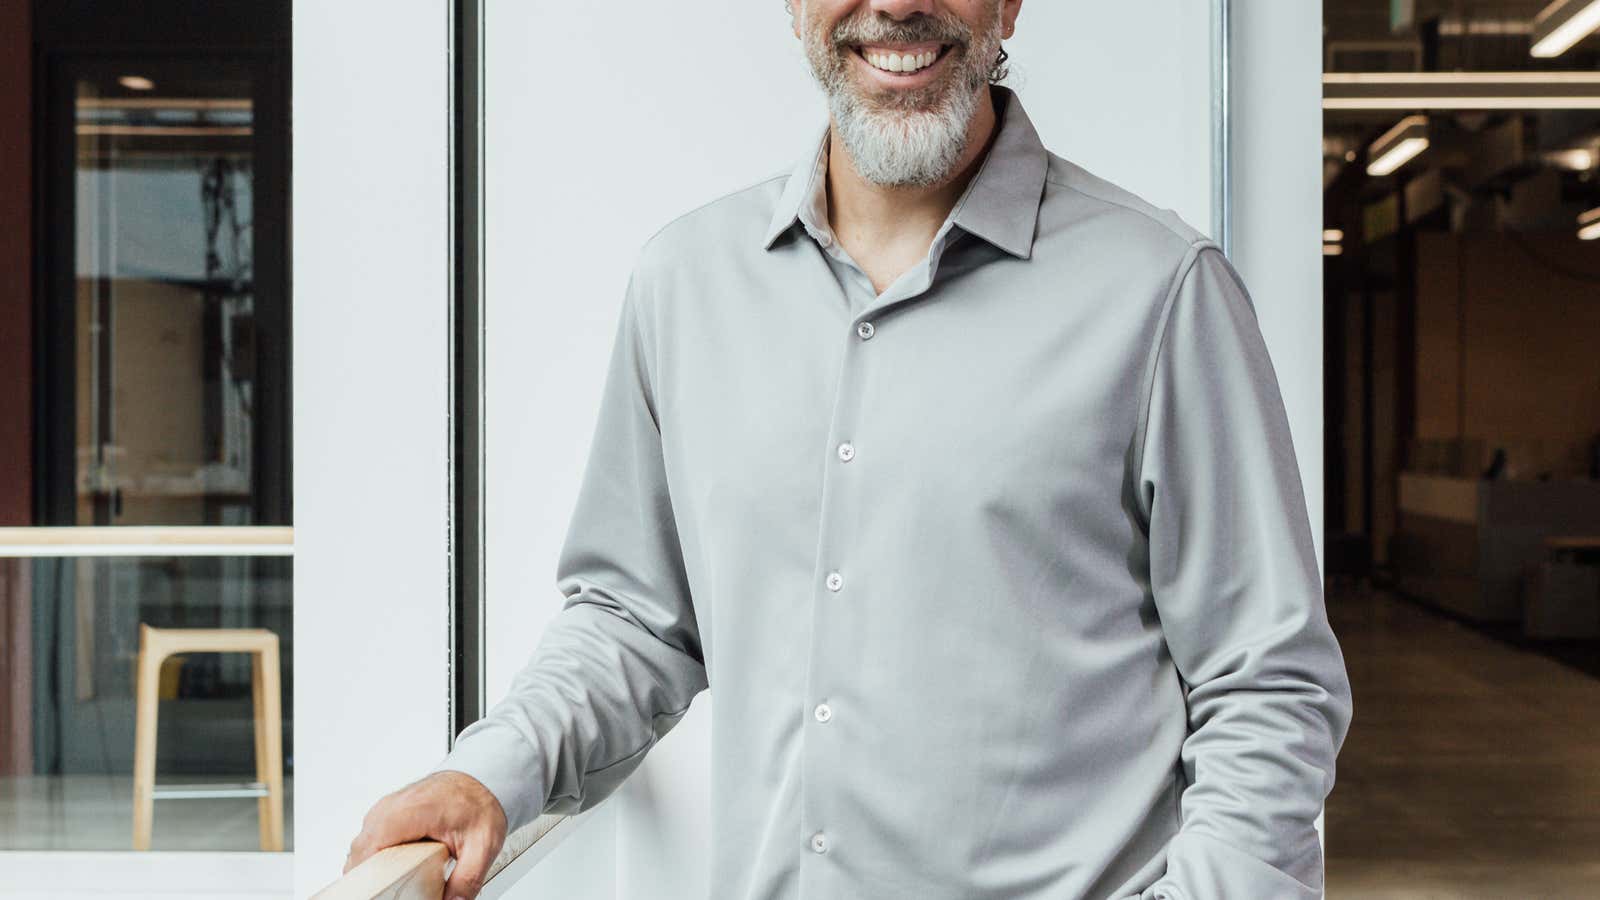 Alphabet X leader Astro Teller says sexism is humanity’s biggest, most fixable problem